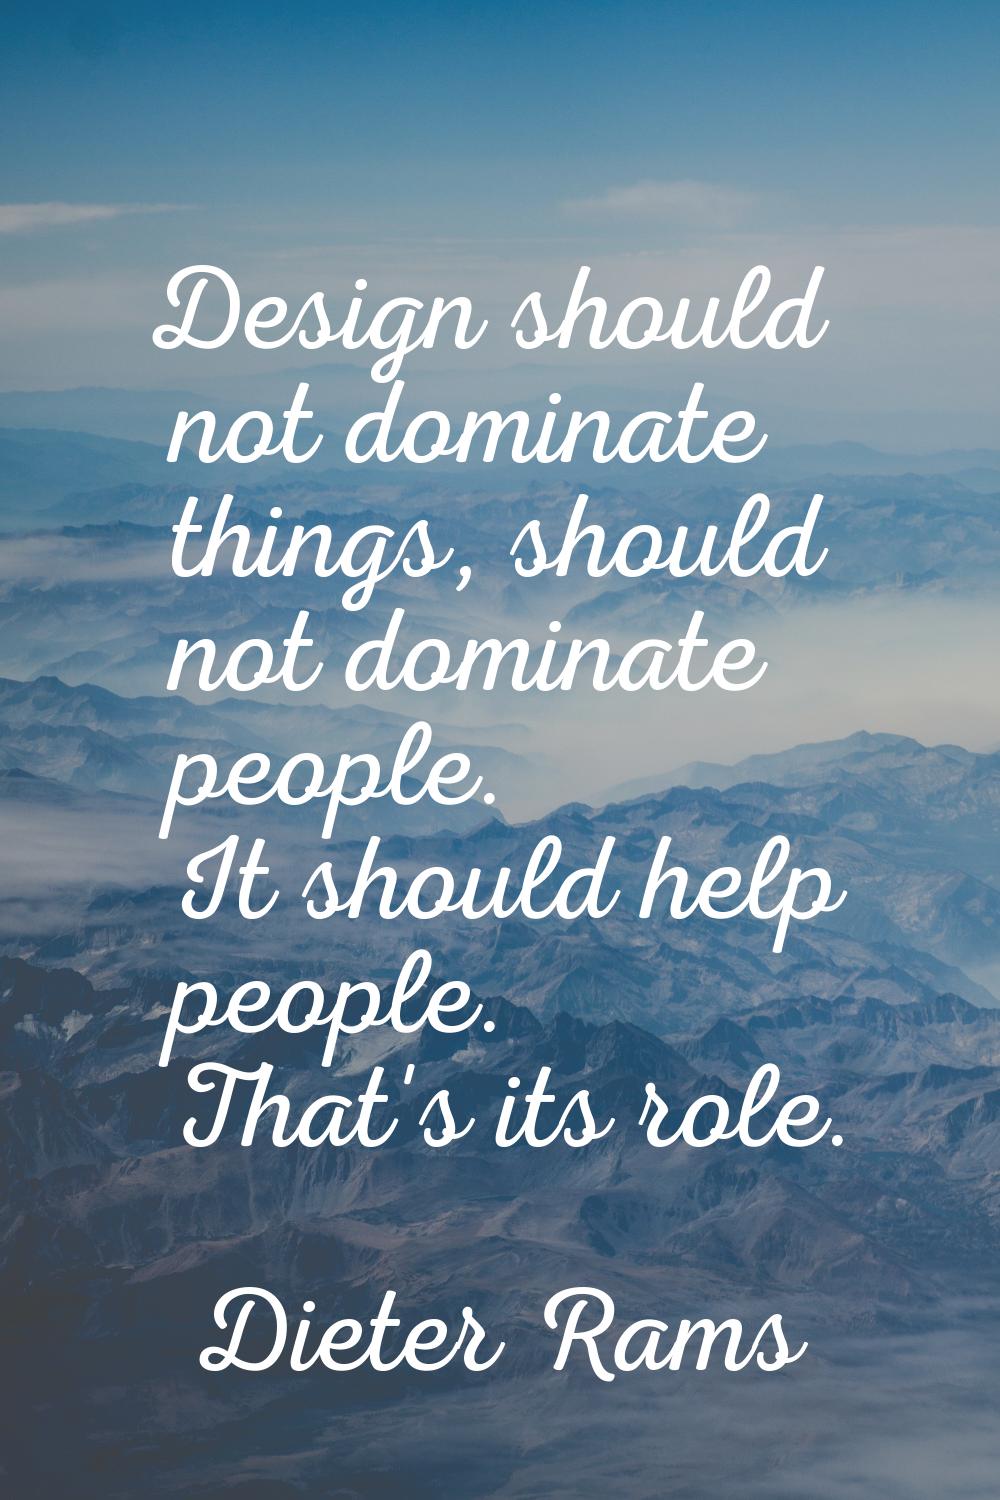 Design should not dominate things, should not dominate people. It should help people. That's its ro